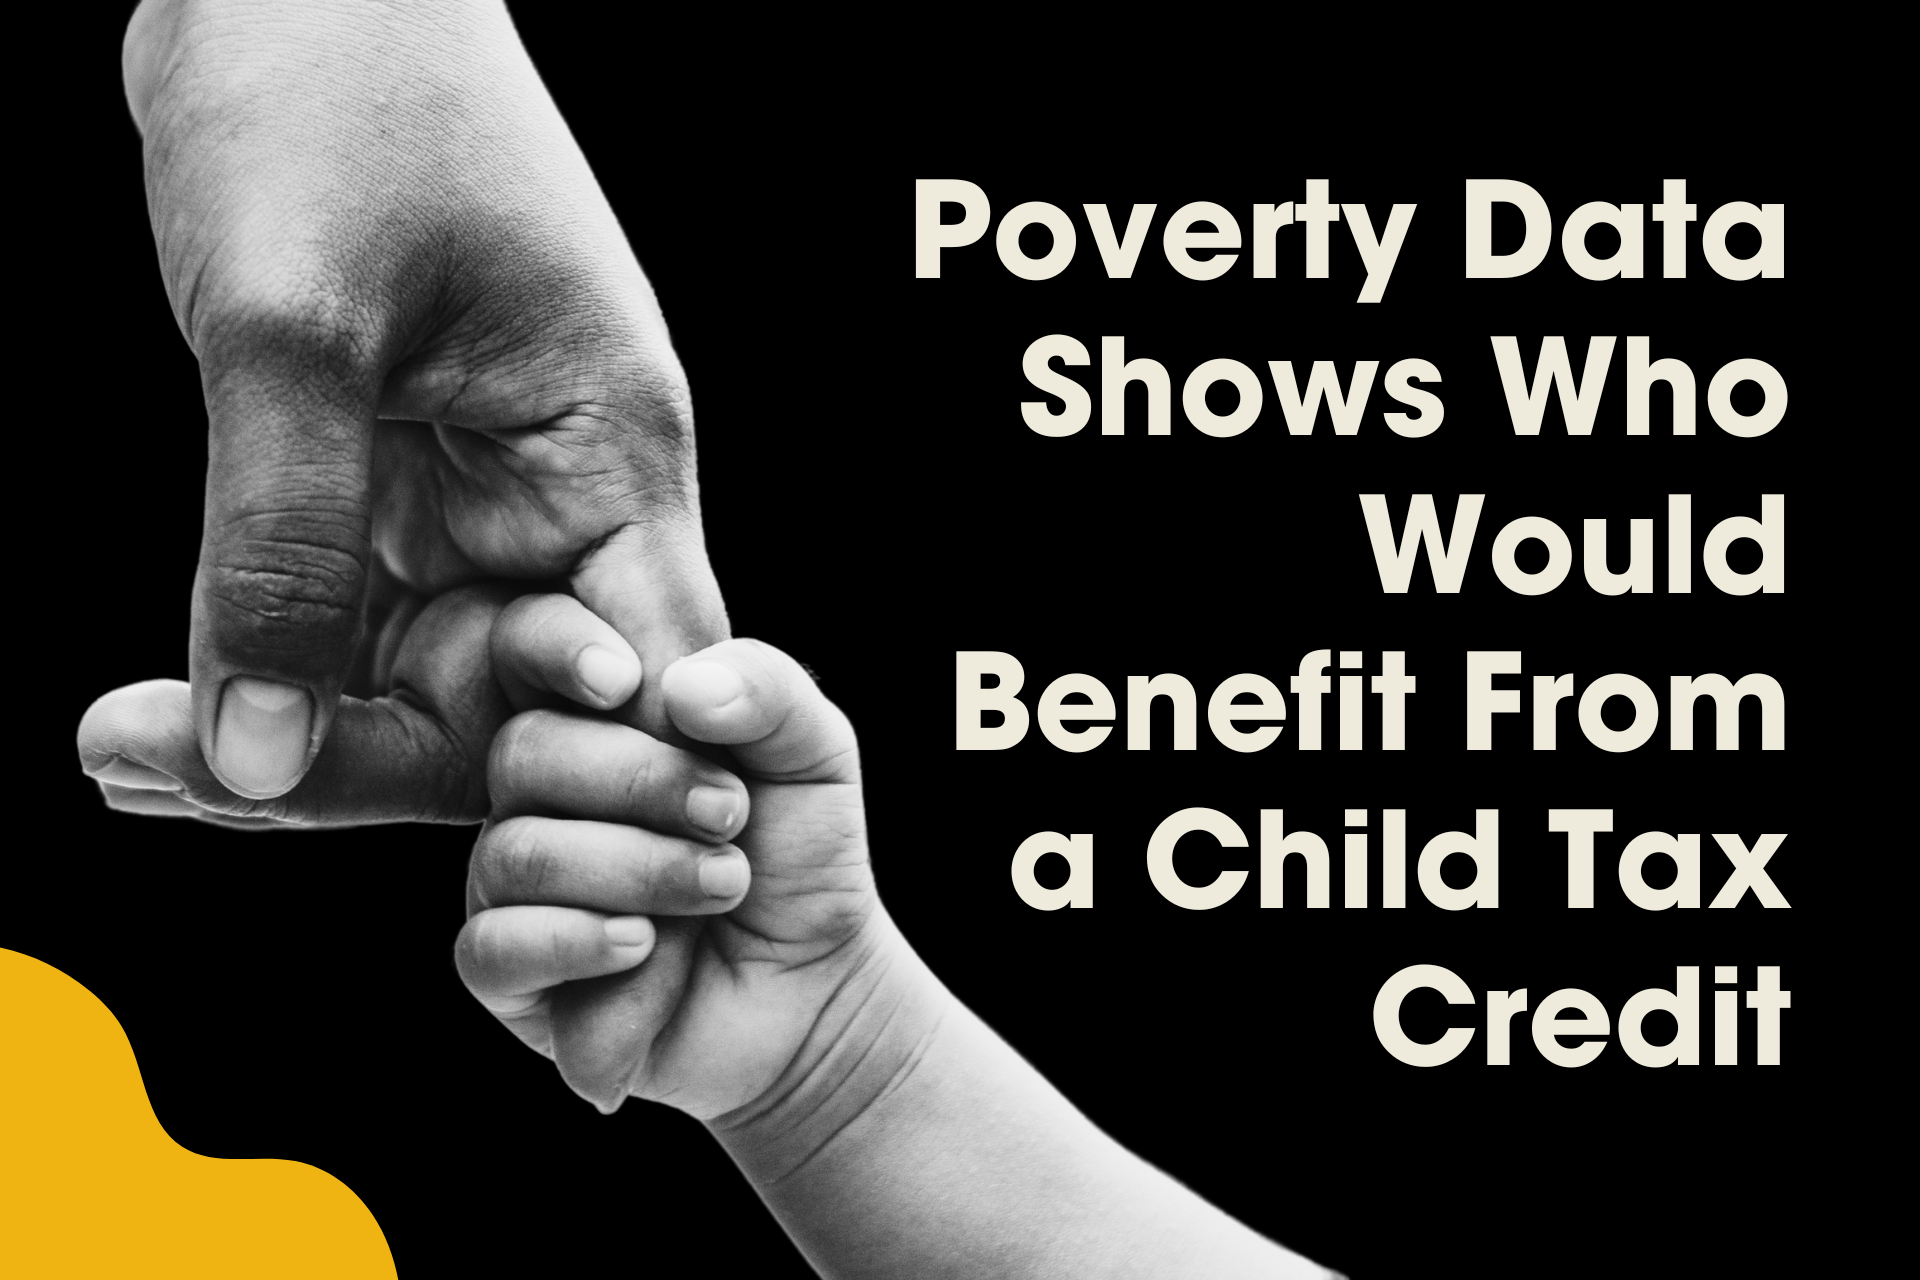 Highlighting the impact of child tax credits as a benefit on poverty reduction.